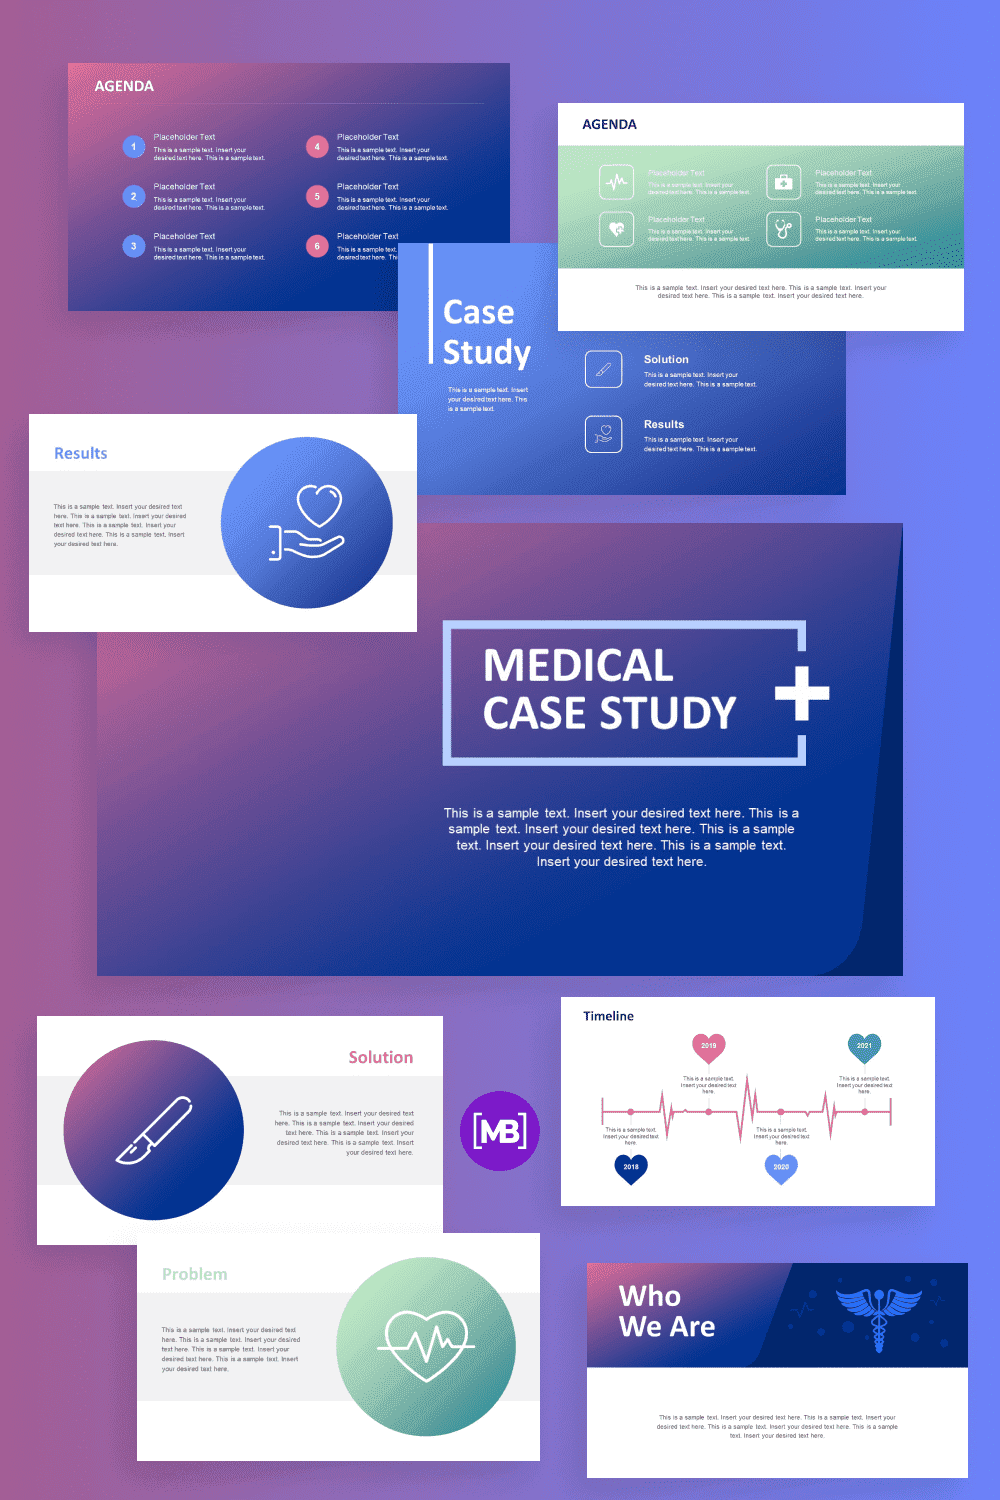 Medical case study powerpoint template.